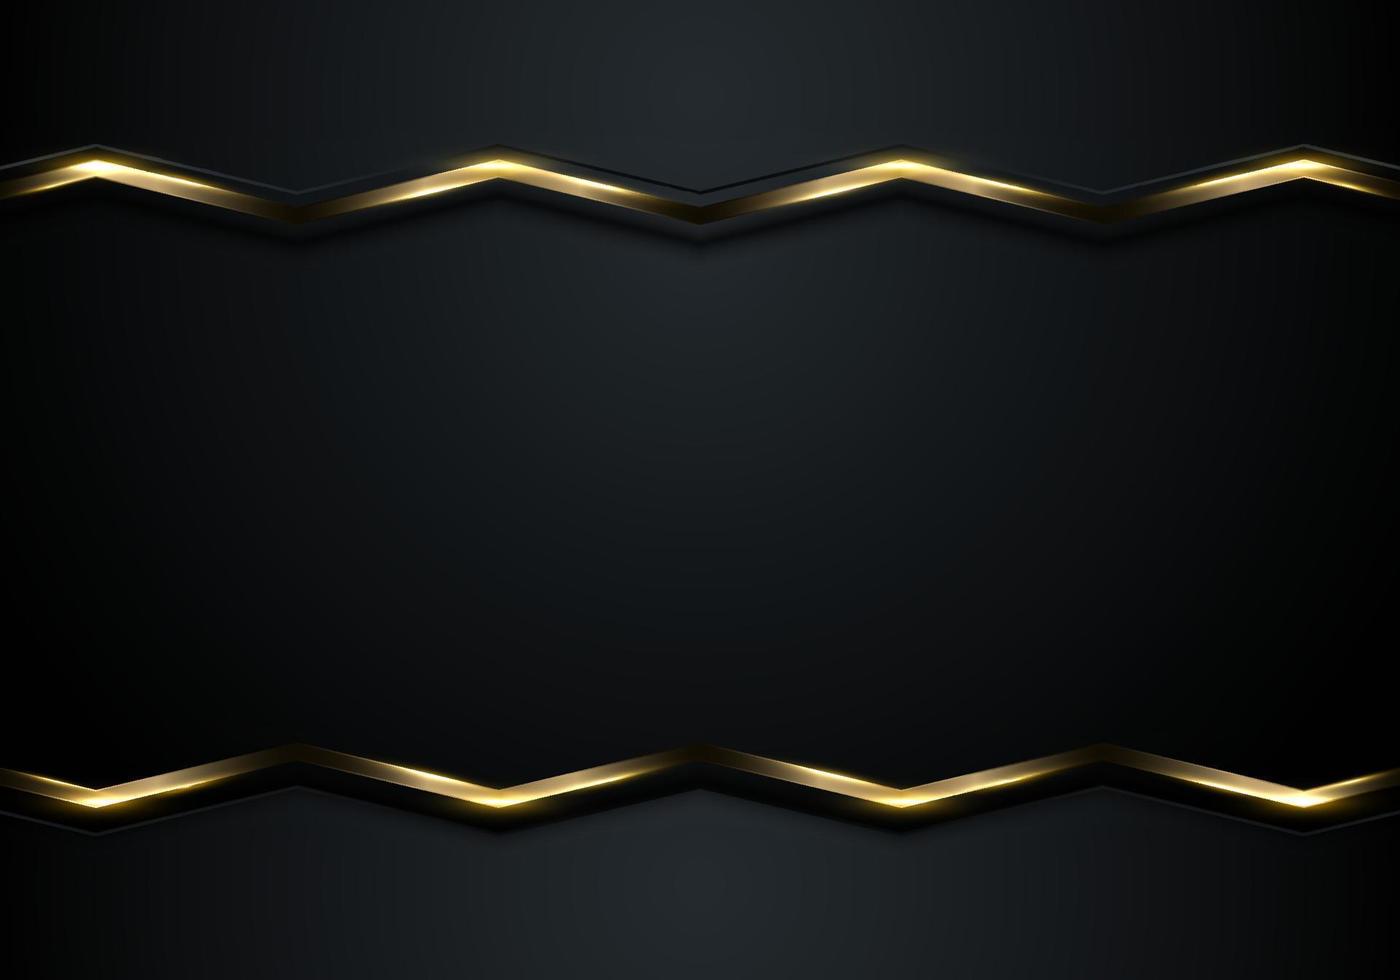 Presentation template luxury style 3D golden chevron lines on black background with lighting effect vector